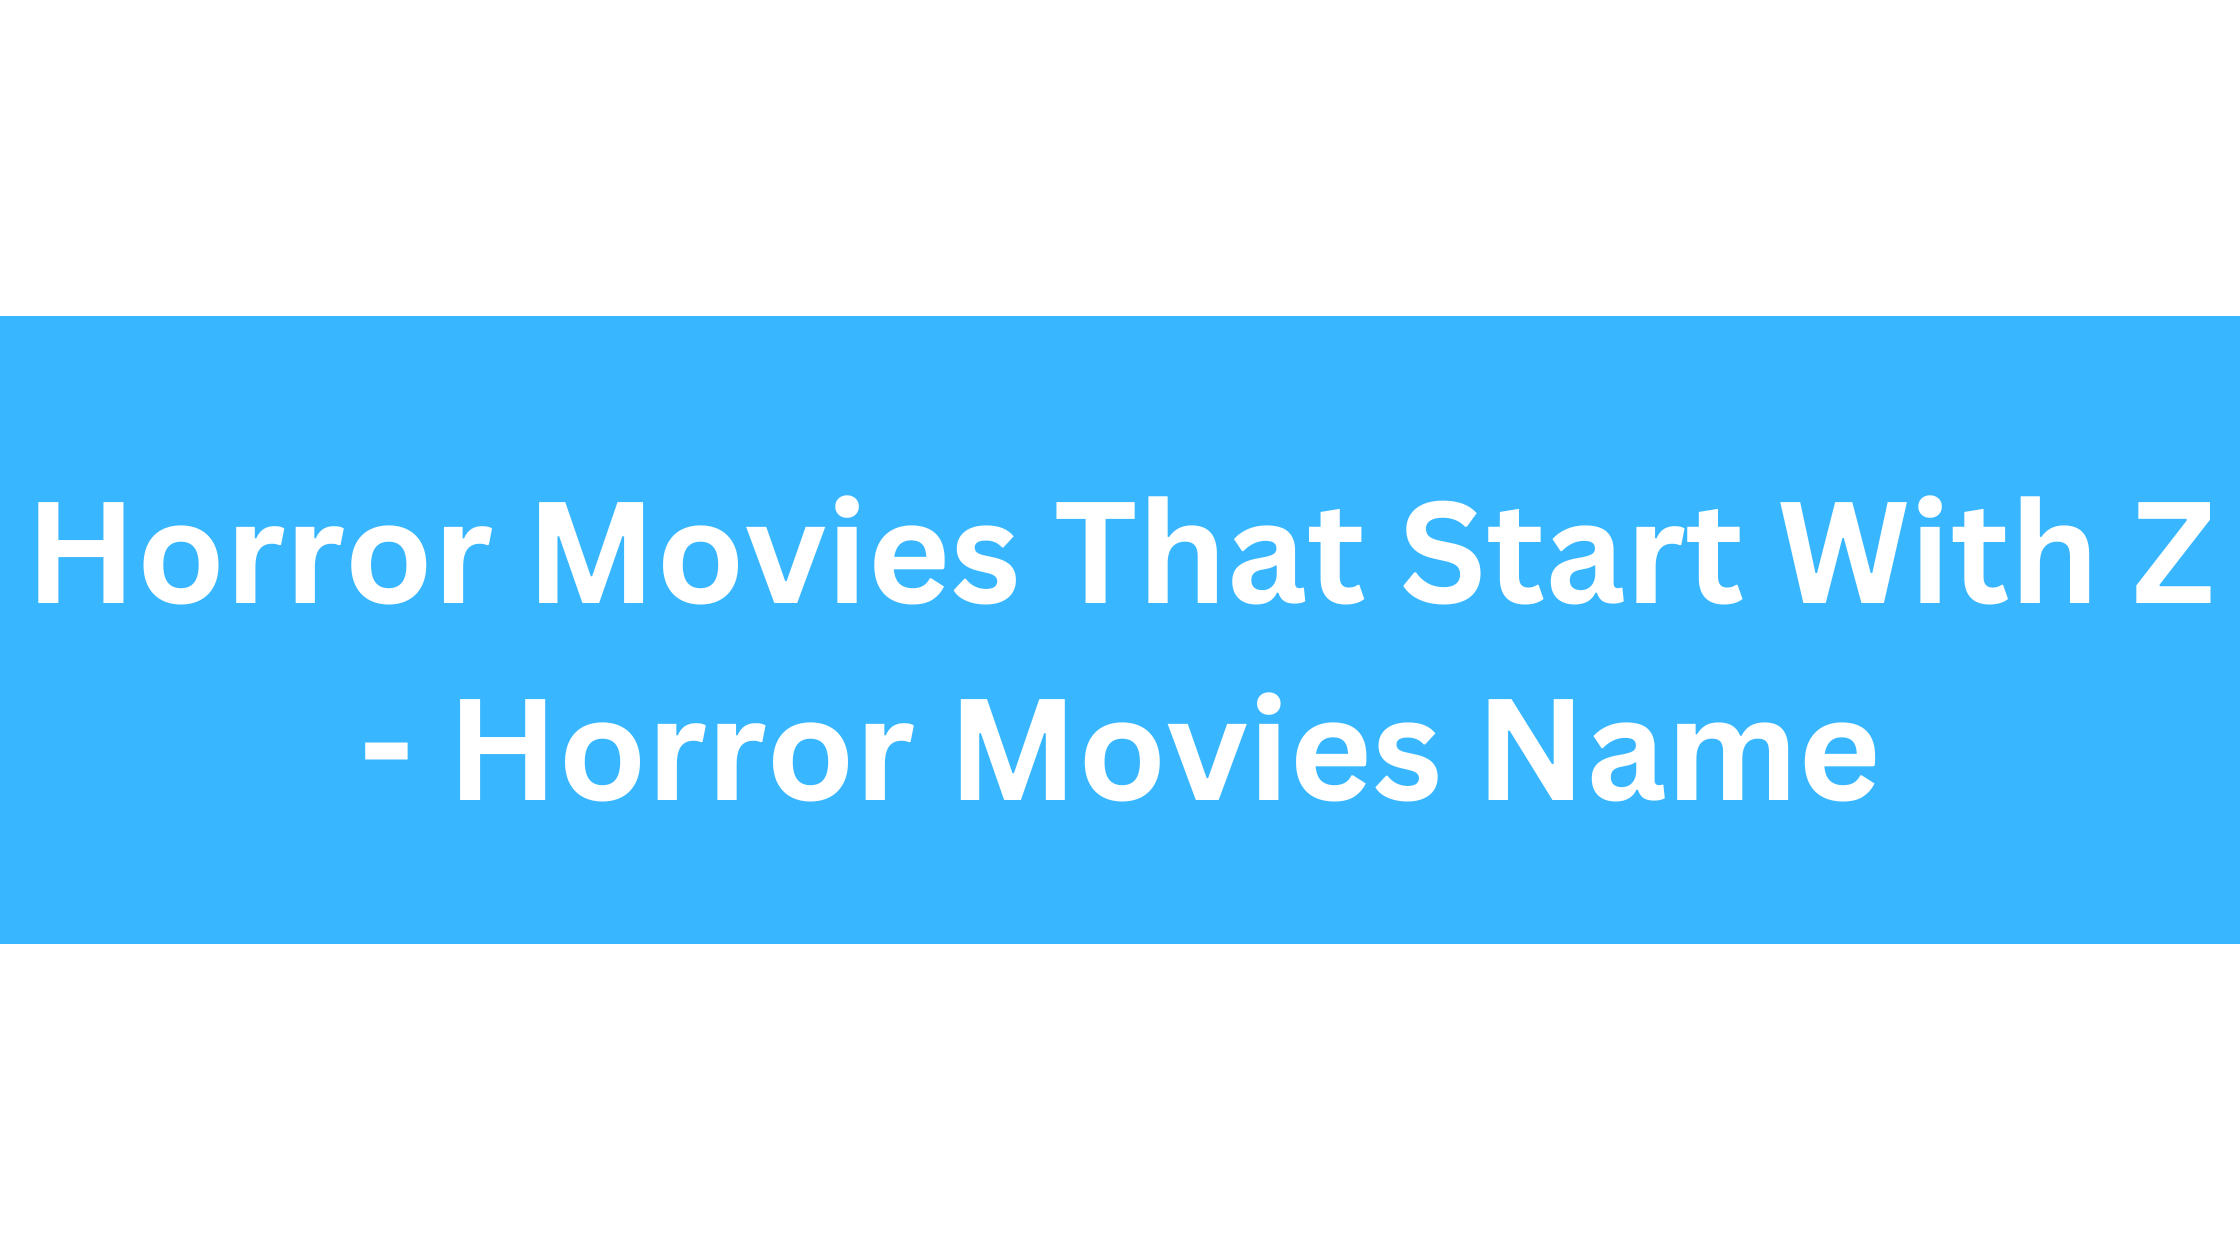 Horror Movies That Start With Z